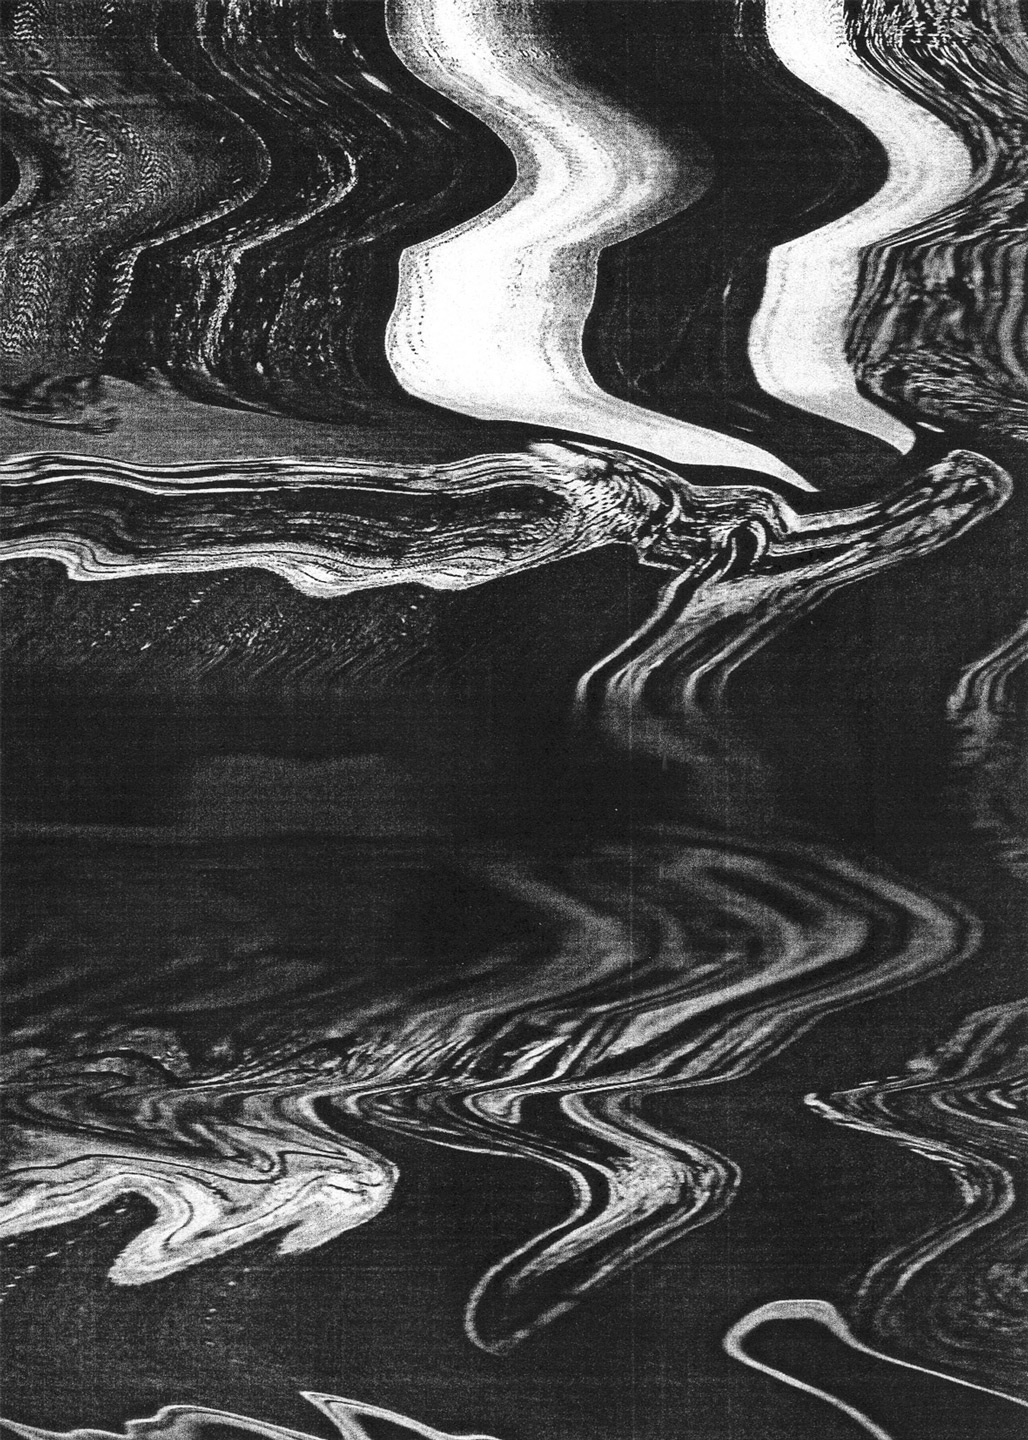 Through the use of scanning and xerox techniques, the abstract image showcases a contorted and fragmented portrayal of nature, evoking a sense of unease and disturbance. The black-and-white composition features textures and glitches that add to its aesthetic.